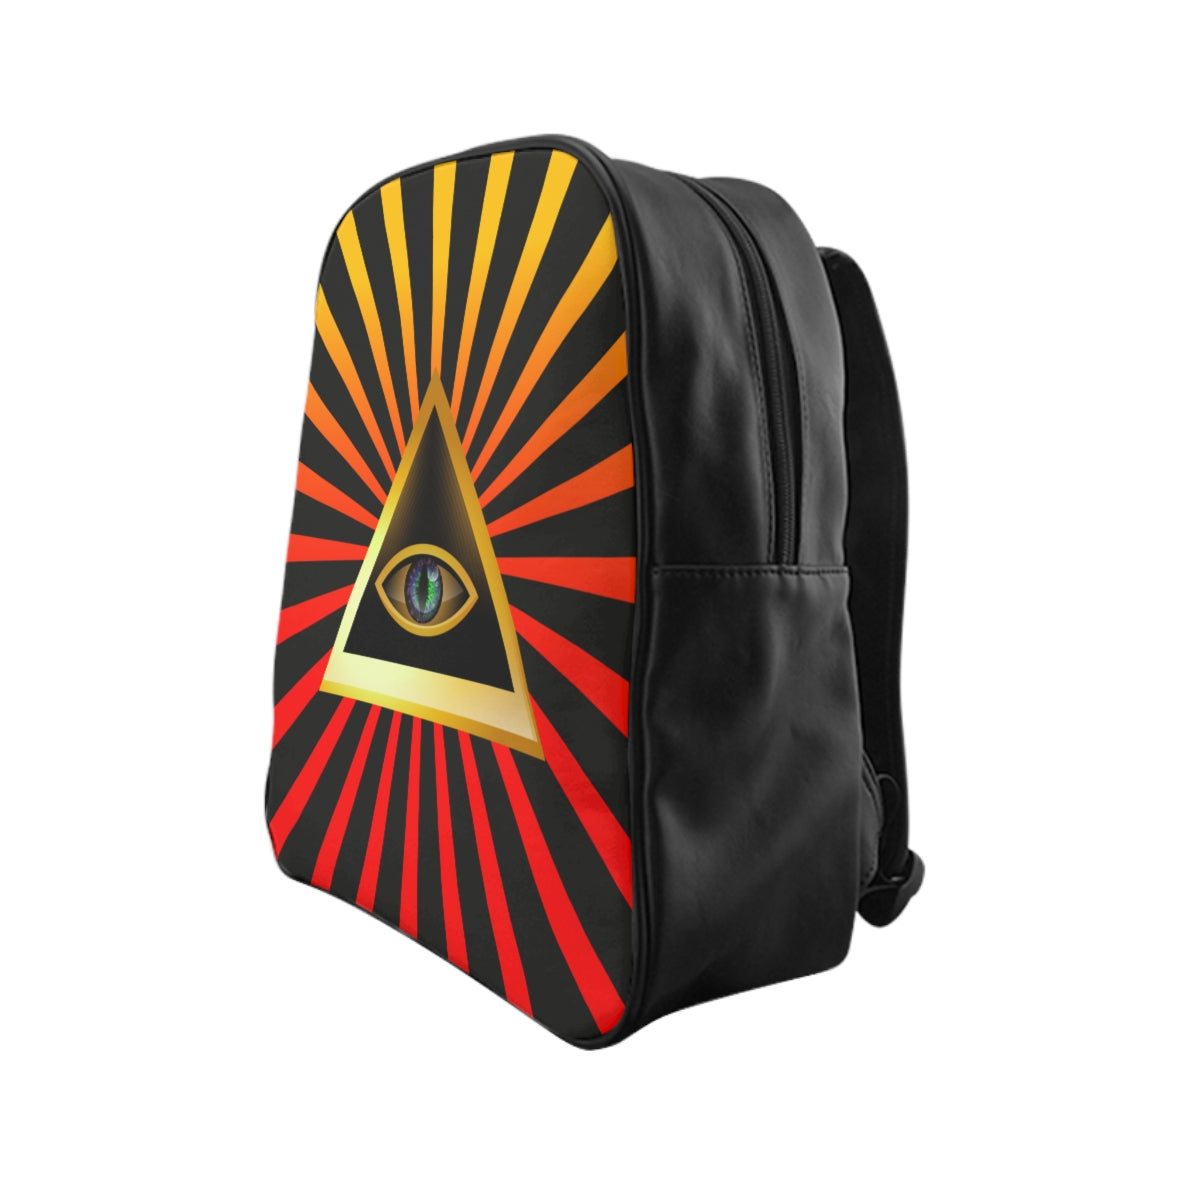 Getrott Illuminati Triangle Eye School Backpack Carry-On Travel Check Luggage 4-Wheel Spinner Suitcase Bag Multiple Colors and Sizes